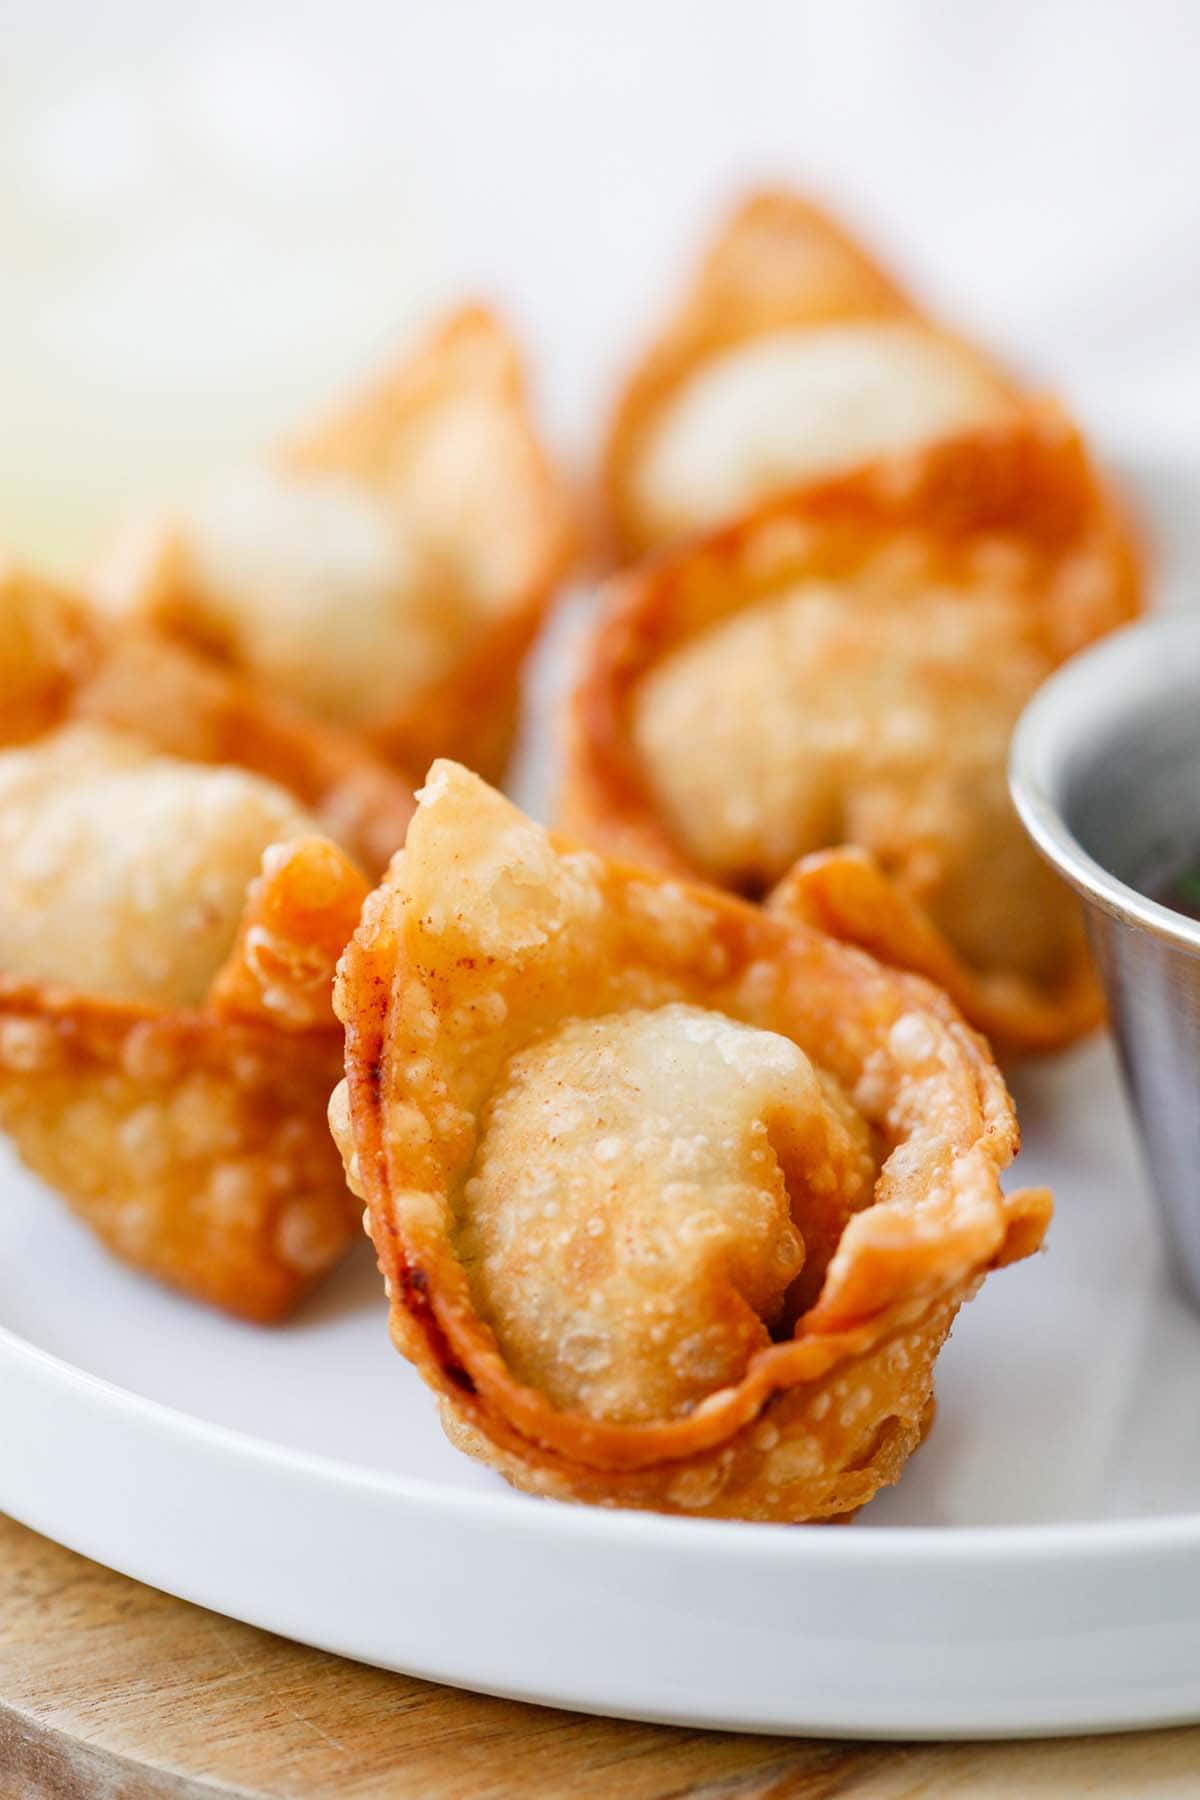 Perfectly brown fried wontons on serving dish with side of sweet and sour sauce.